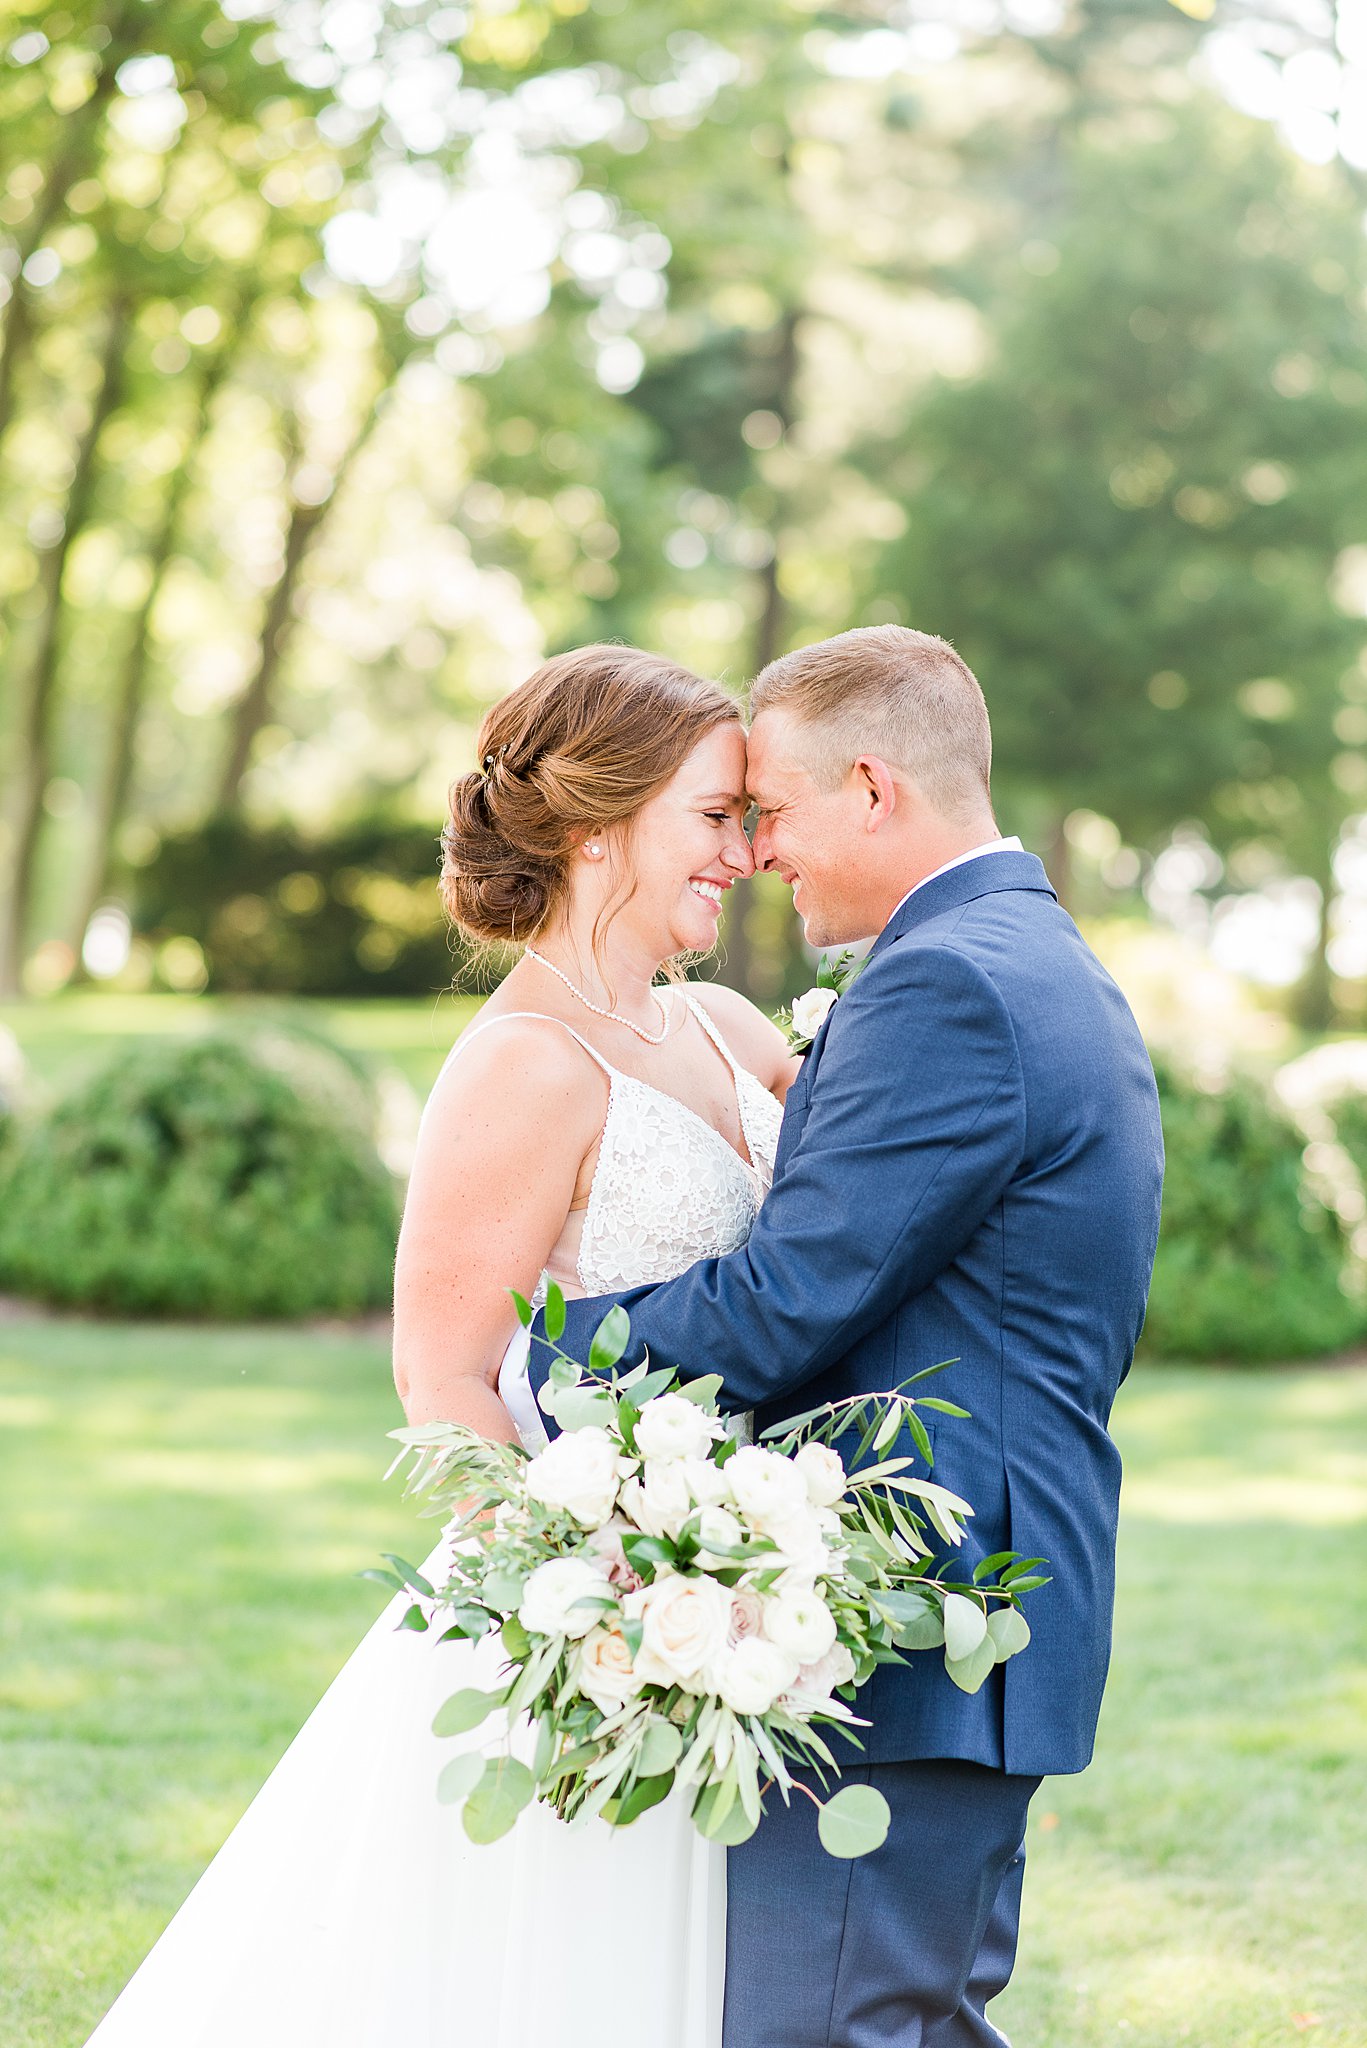 Newlyweds smile big while touching foreheads in a lawn at sunset